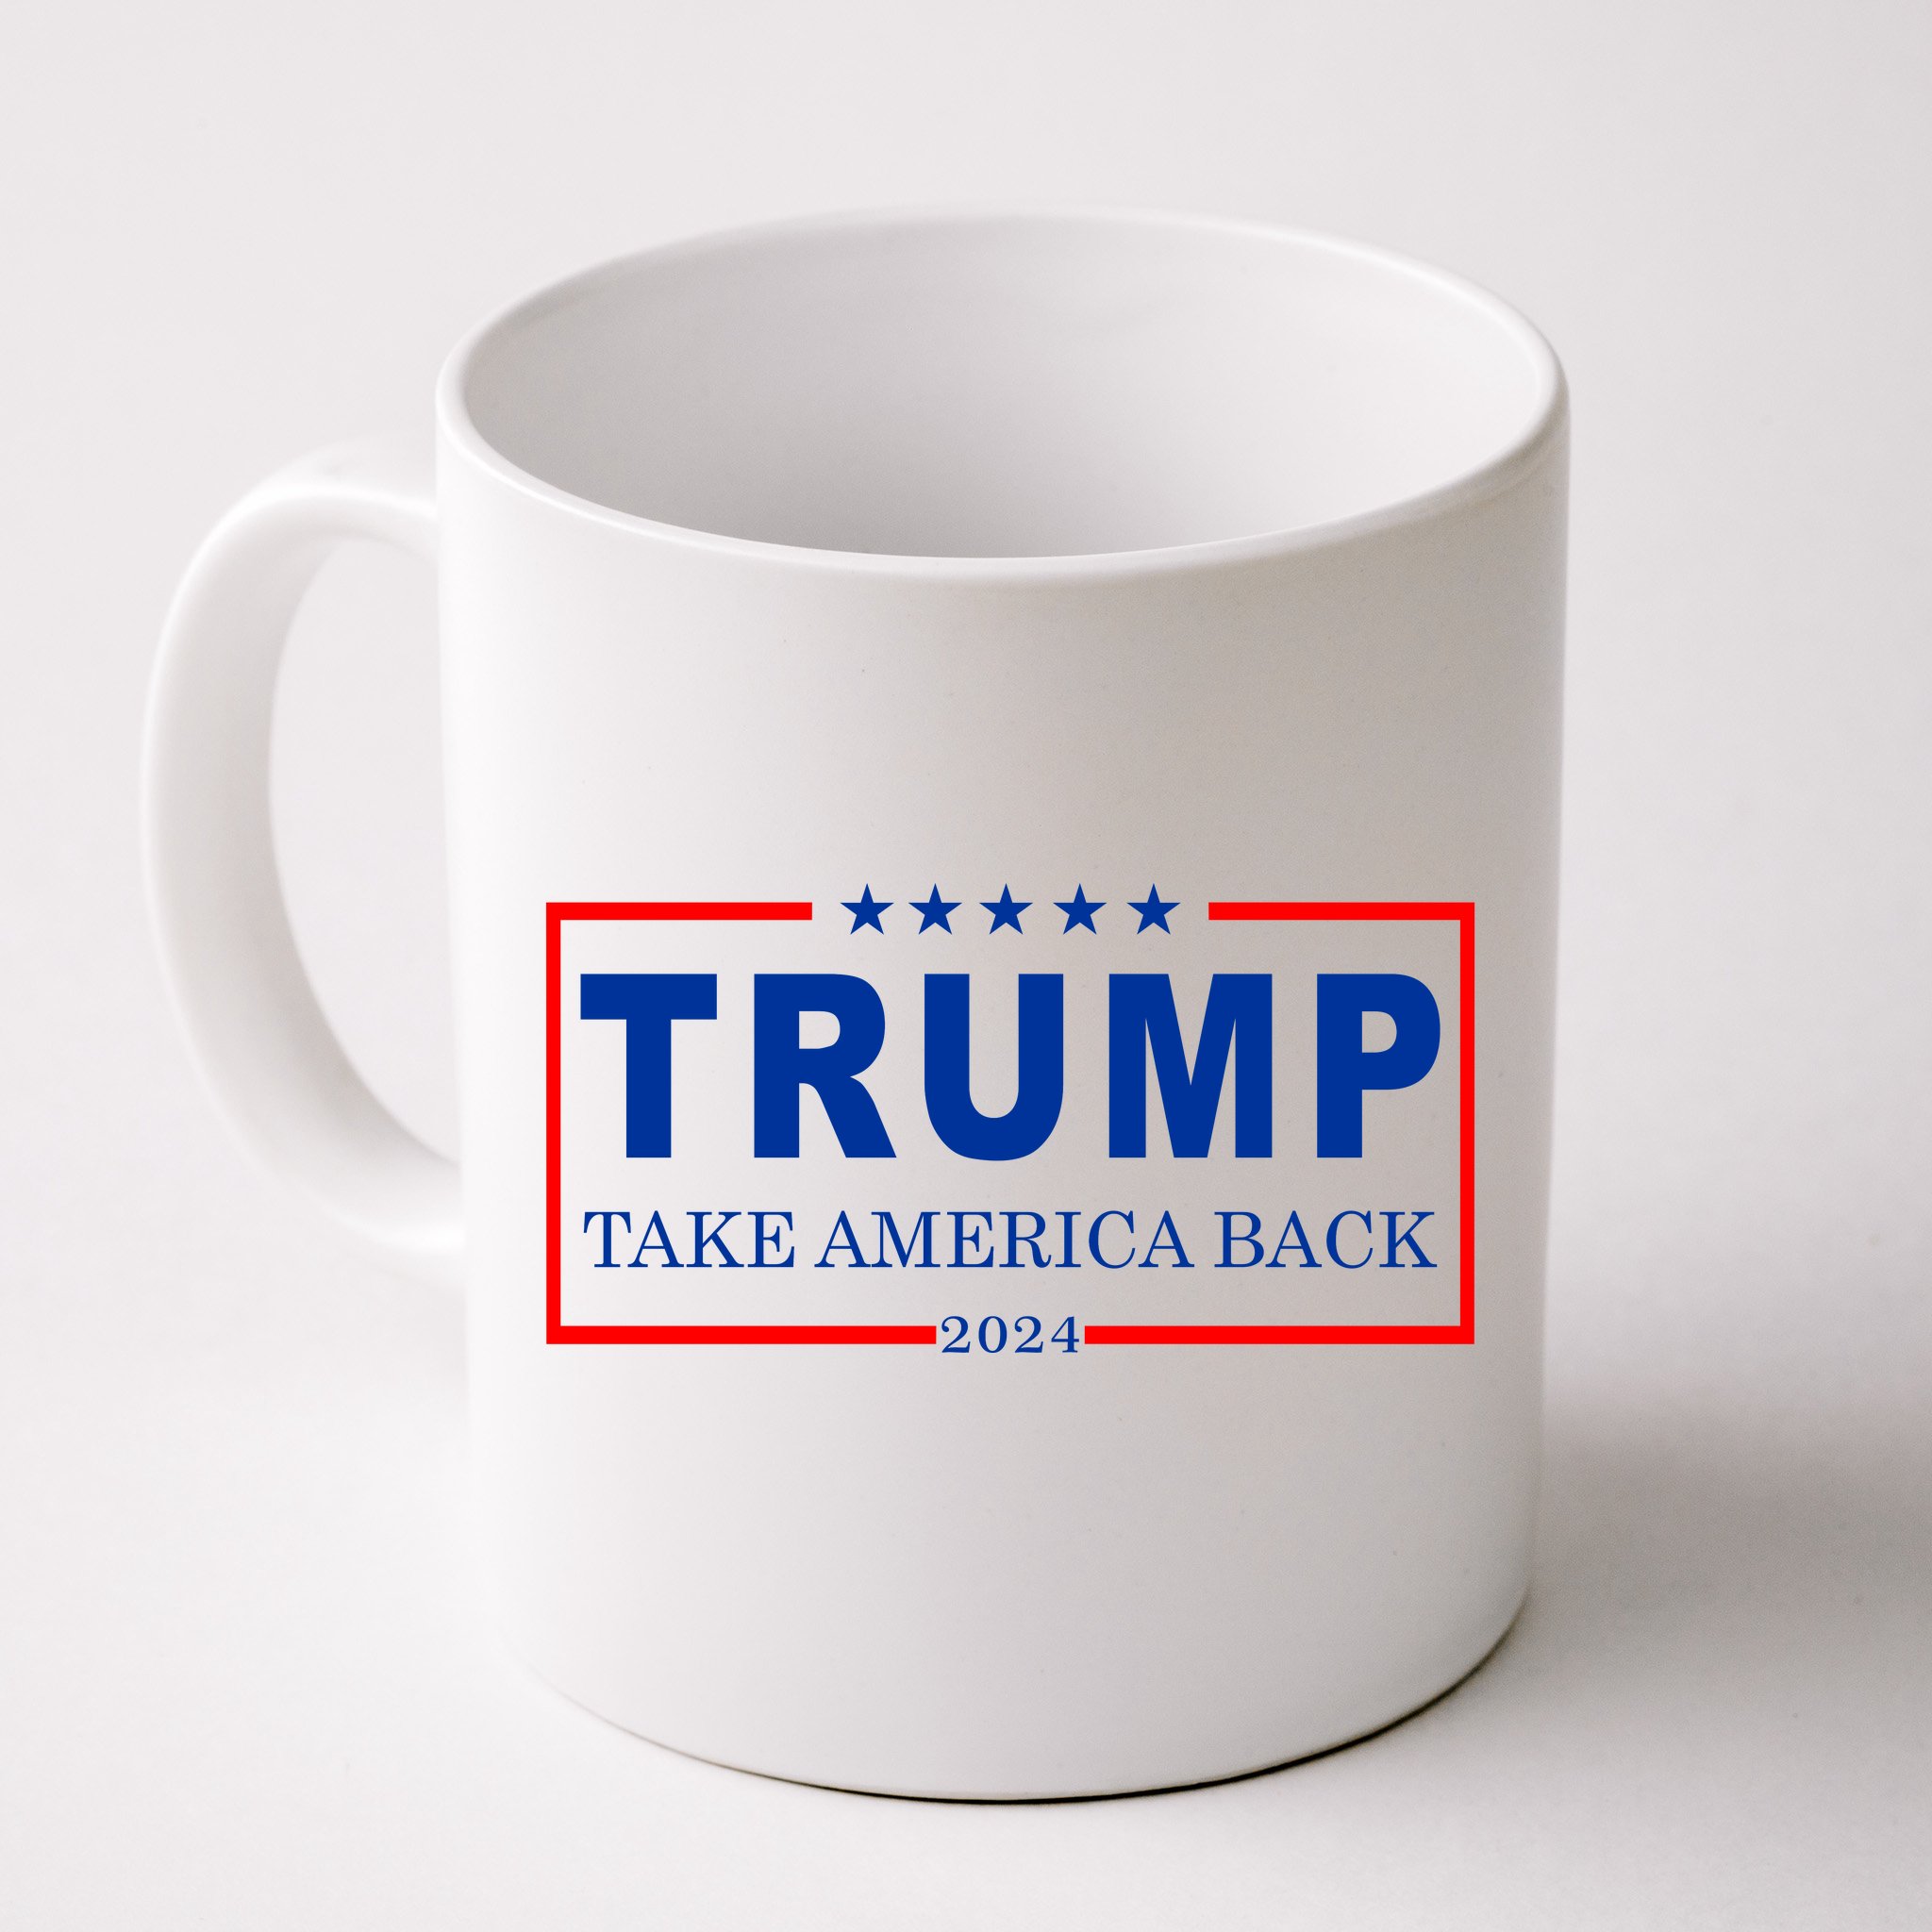 https://images3.teeshirtpalace.com/images/productImages/dt29605810-donald-trump-2024-take-america-back-usa-united-states--white-cfm-front.jpg